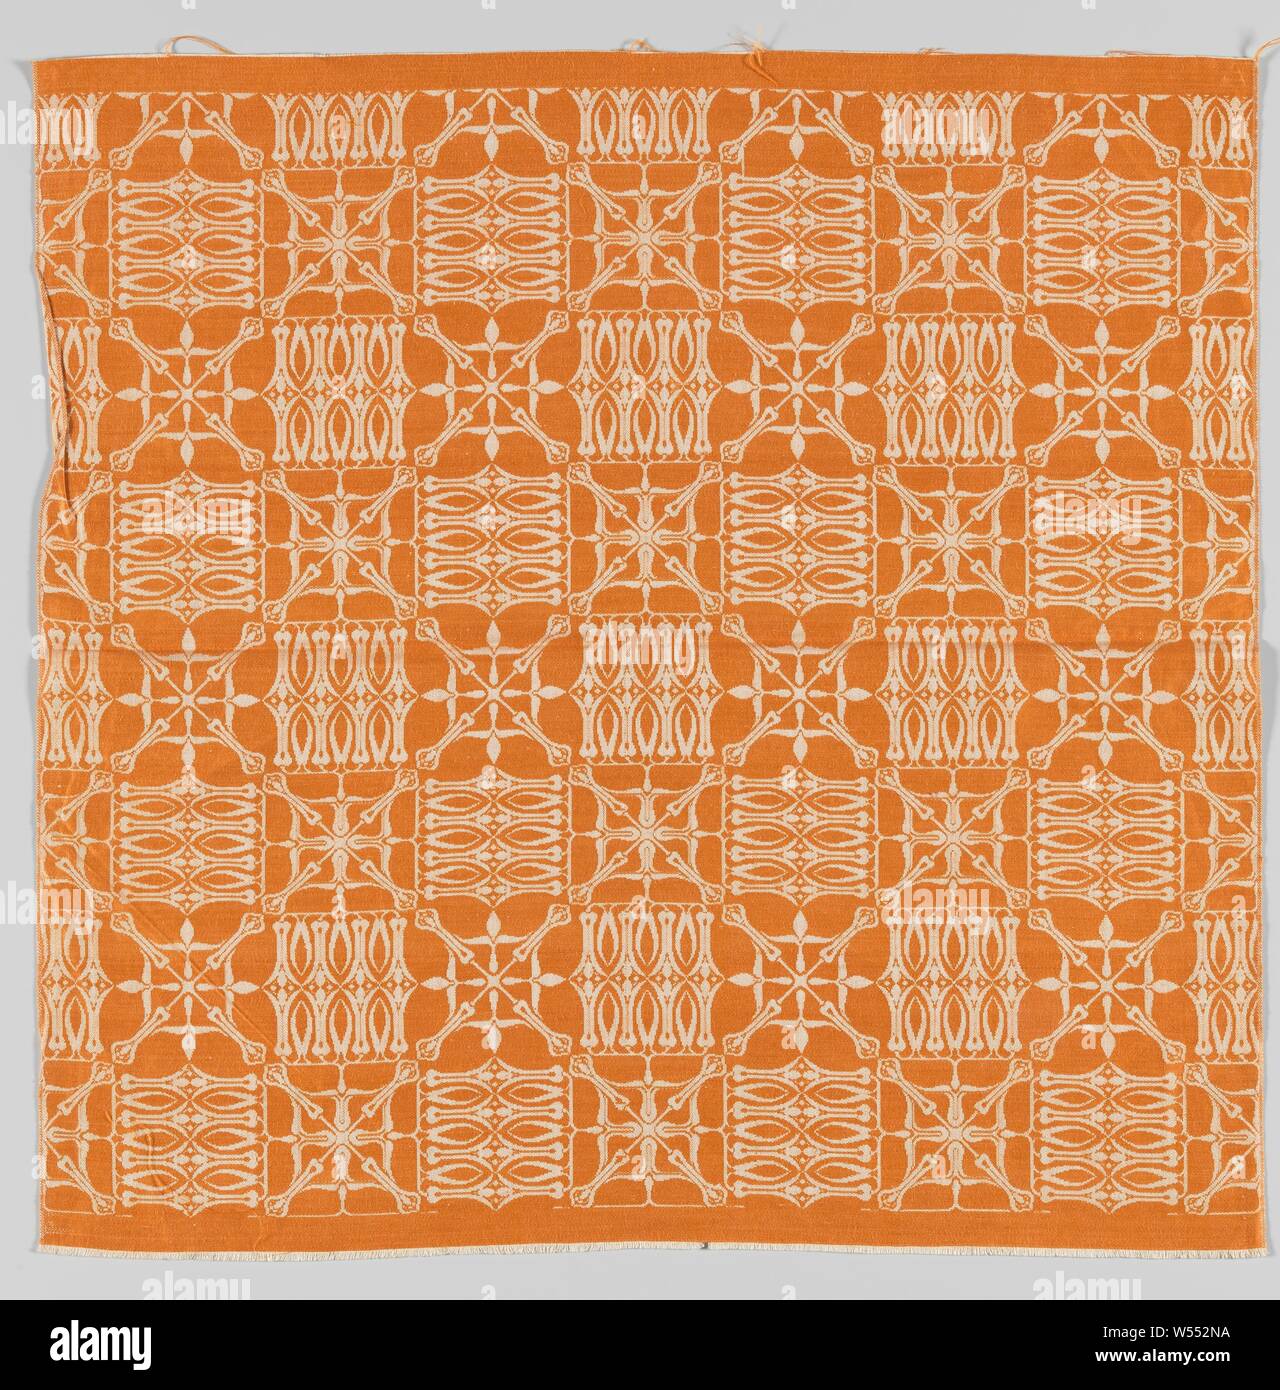 Steel fabric of linen damask with nail flowers, Steel fabric of linen damask with a stylized pattern of nail flowers in white on an orange ground., Chris Lebeau, Eindhoven, 1911 - 1915, linen (material), damask, h 56.5 cm × w 57.2 cm Stock Photo